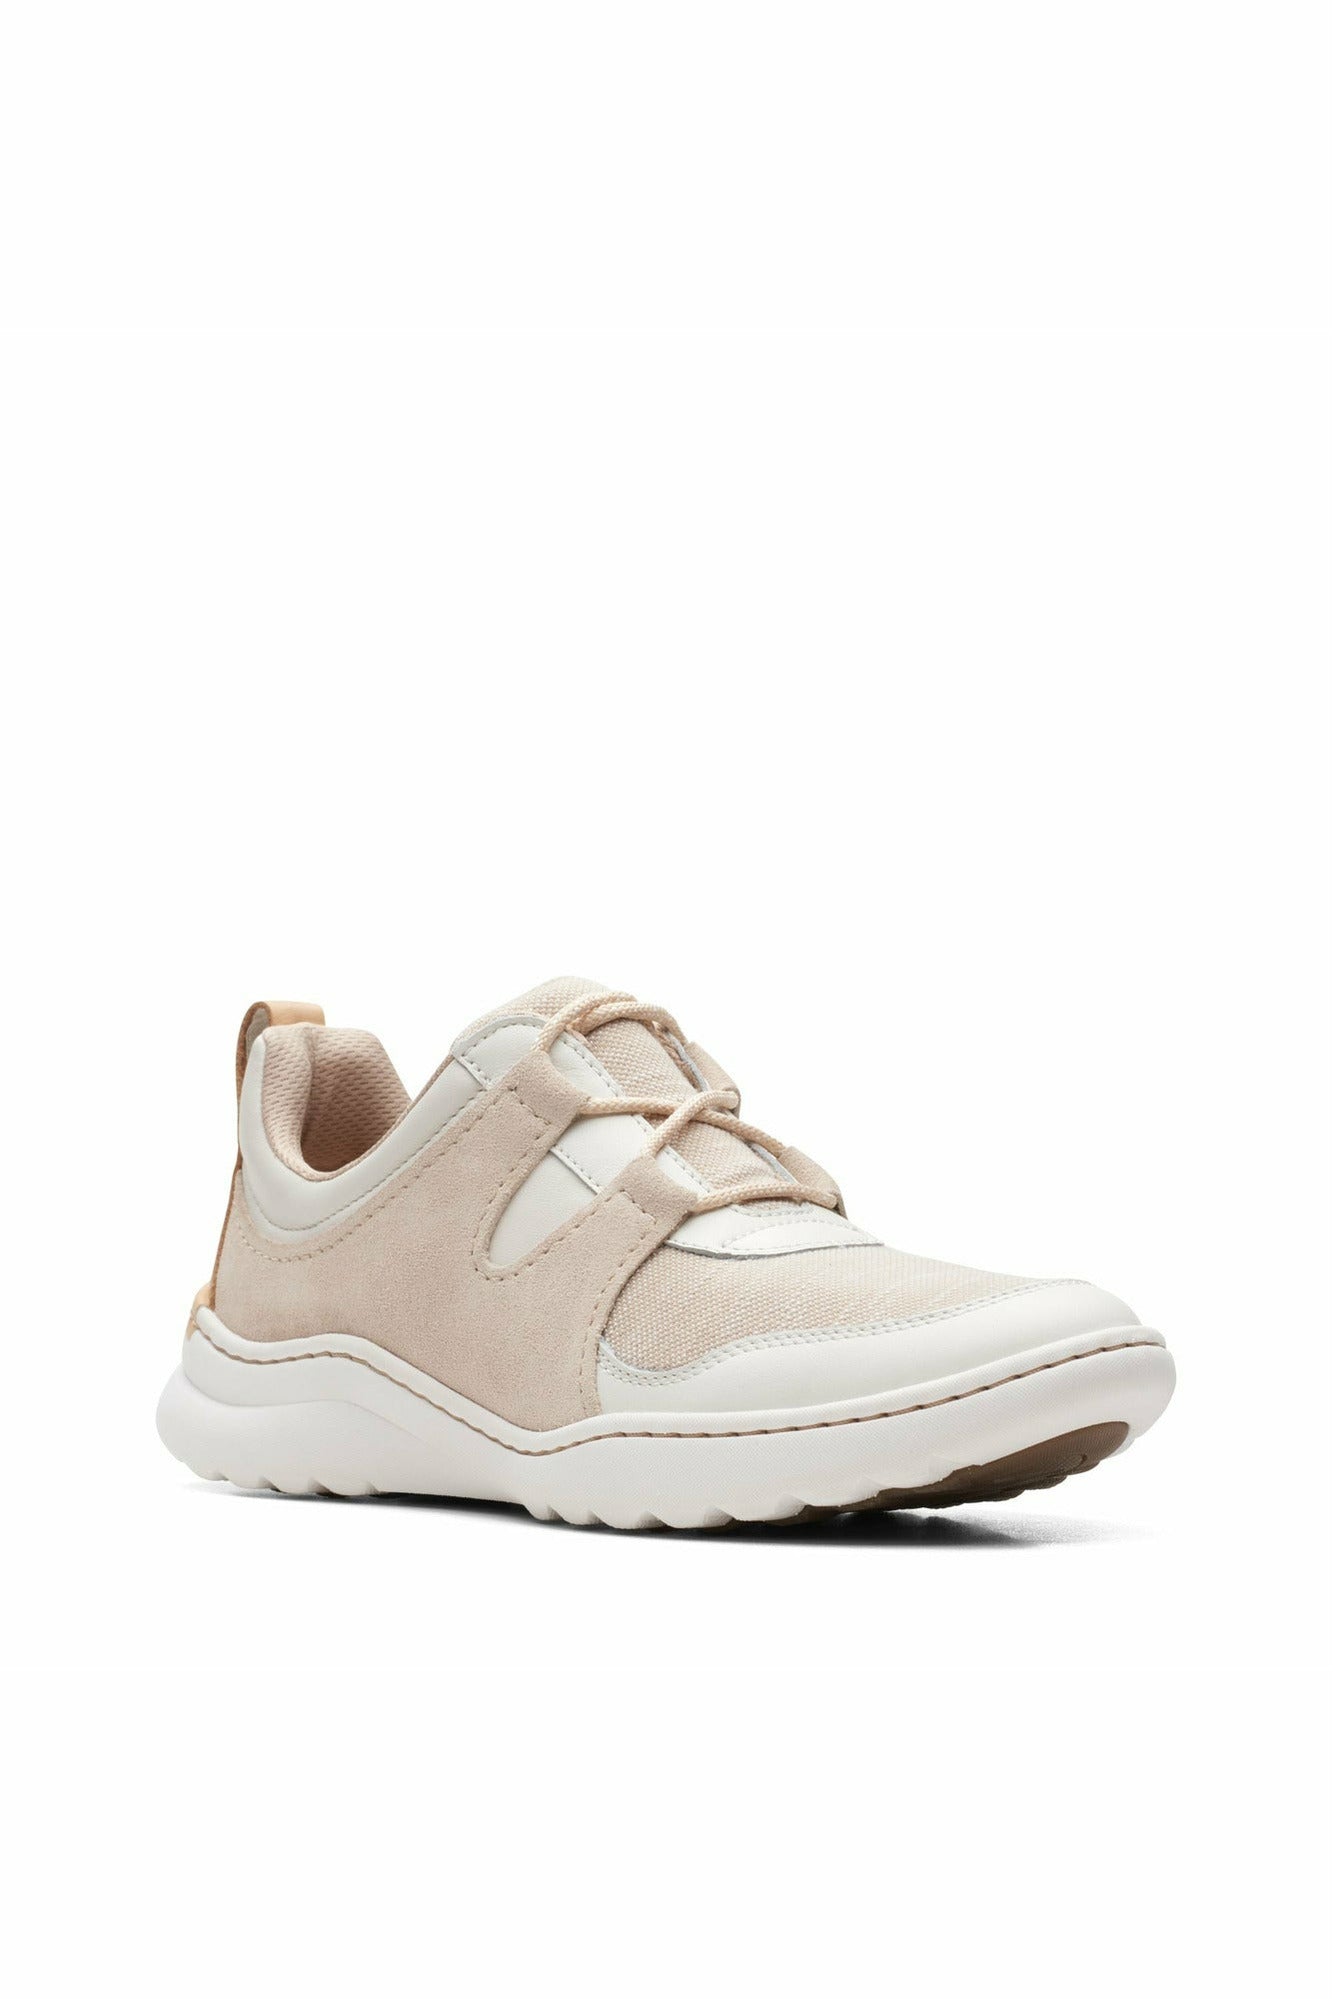 Clarks Teagan Lace in Sand Combi